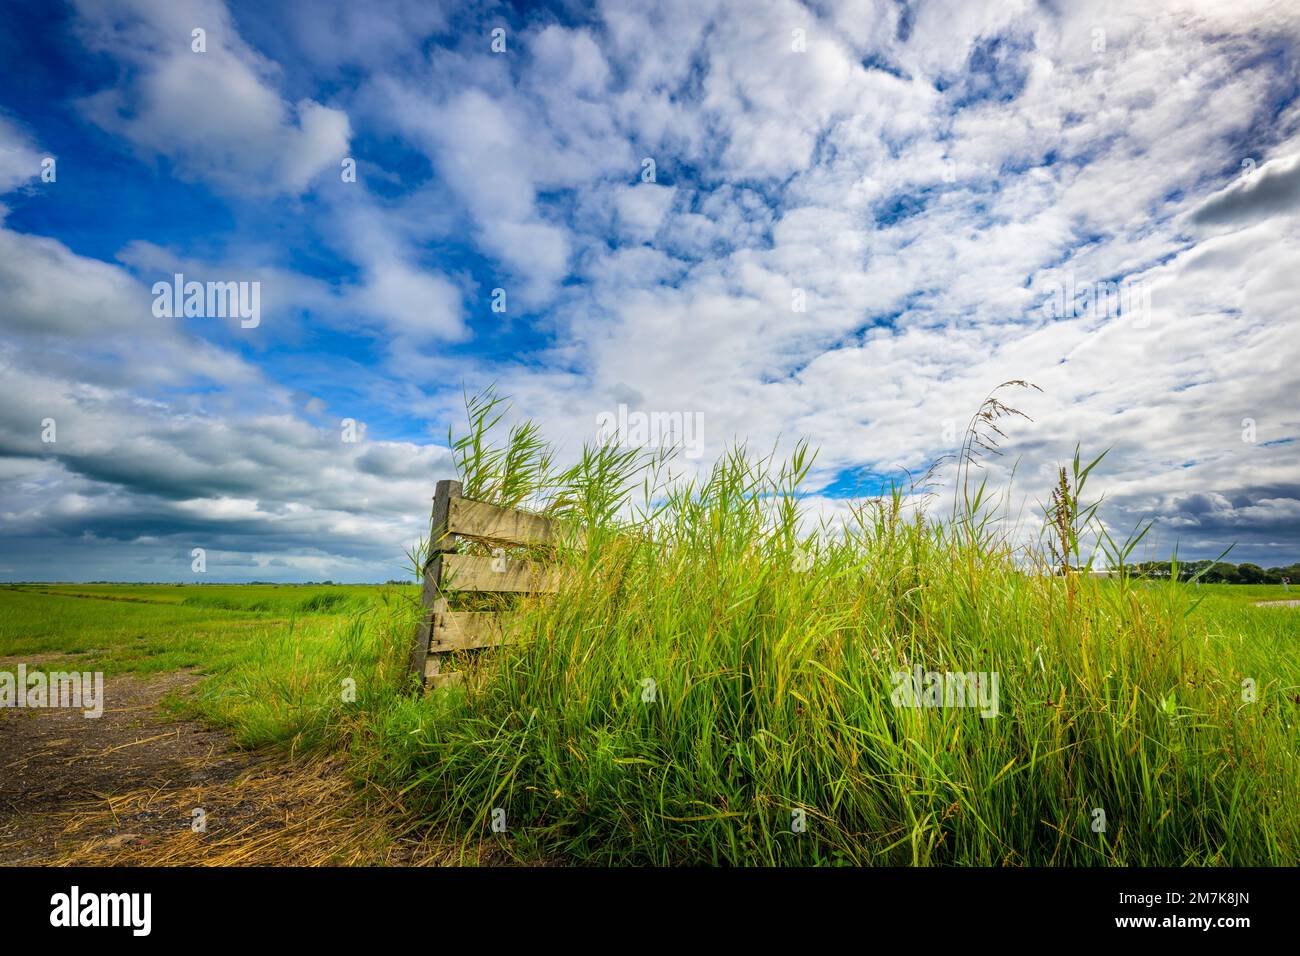 Wooden fence in dairy farm land in dutch countryside, Netherlands. Stock Photo